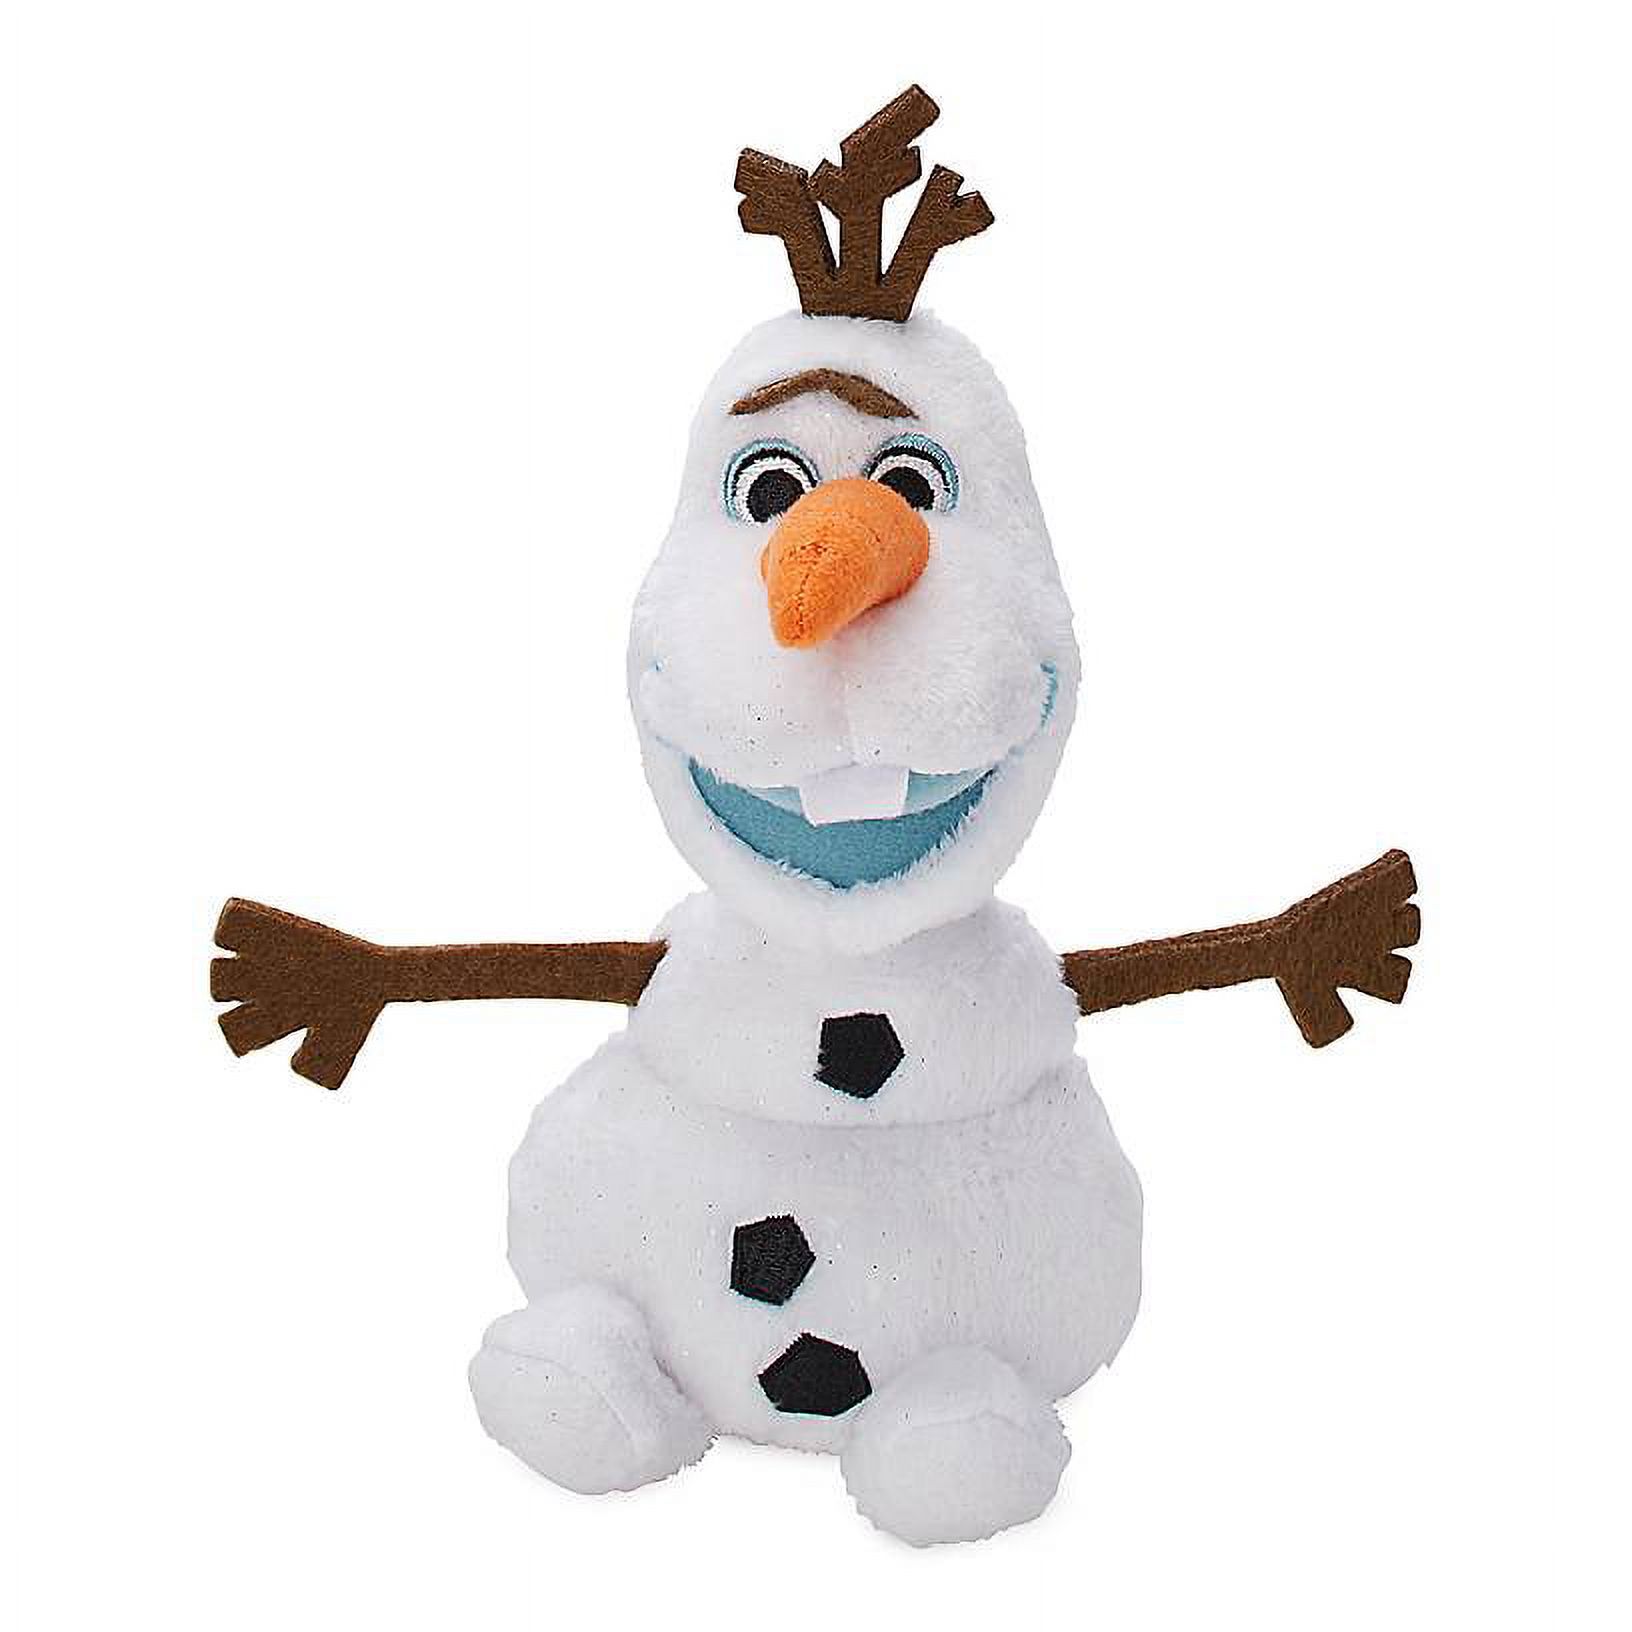 Disney Olaf Plush Frozen 2 Mini Bean Bag 6 1/2'' New with Tags - image 1 of 3